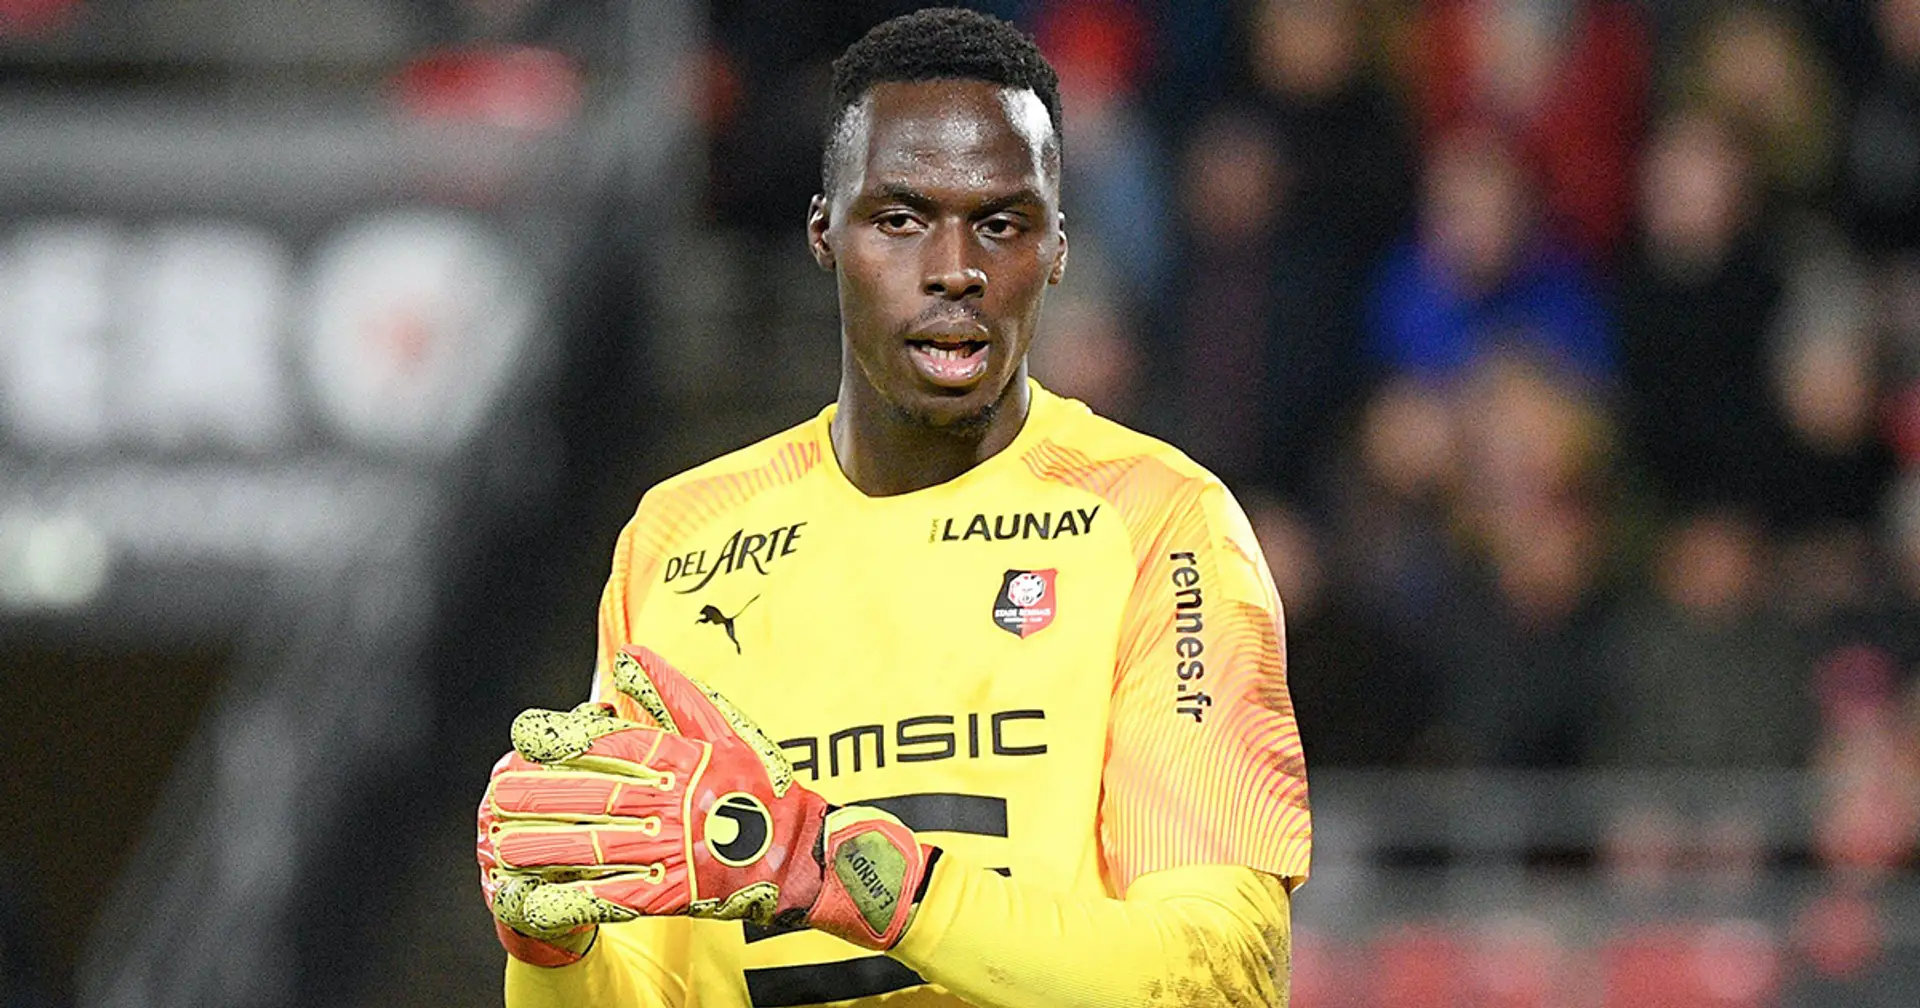 Past struggles, tremendous rise and not another step backwards: Edouard Mendy's career so far broken down in 9 key facts